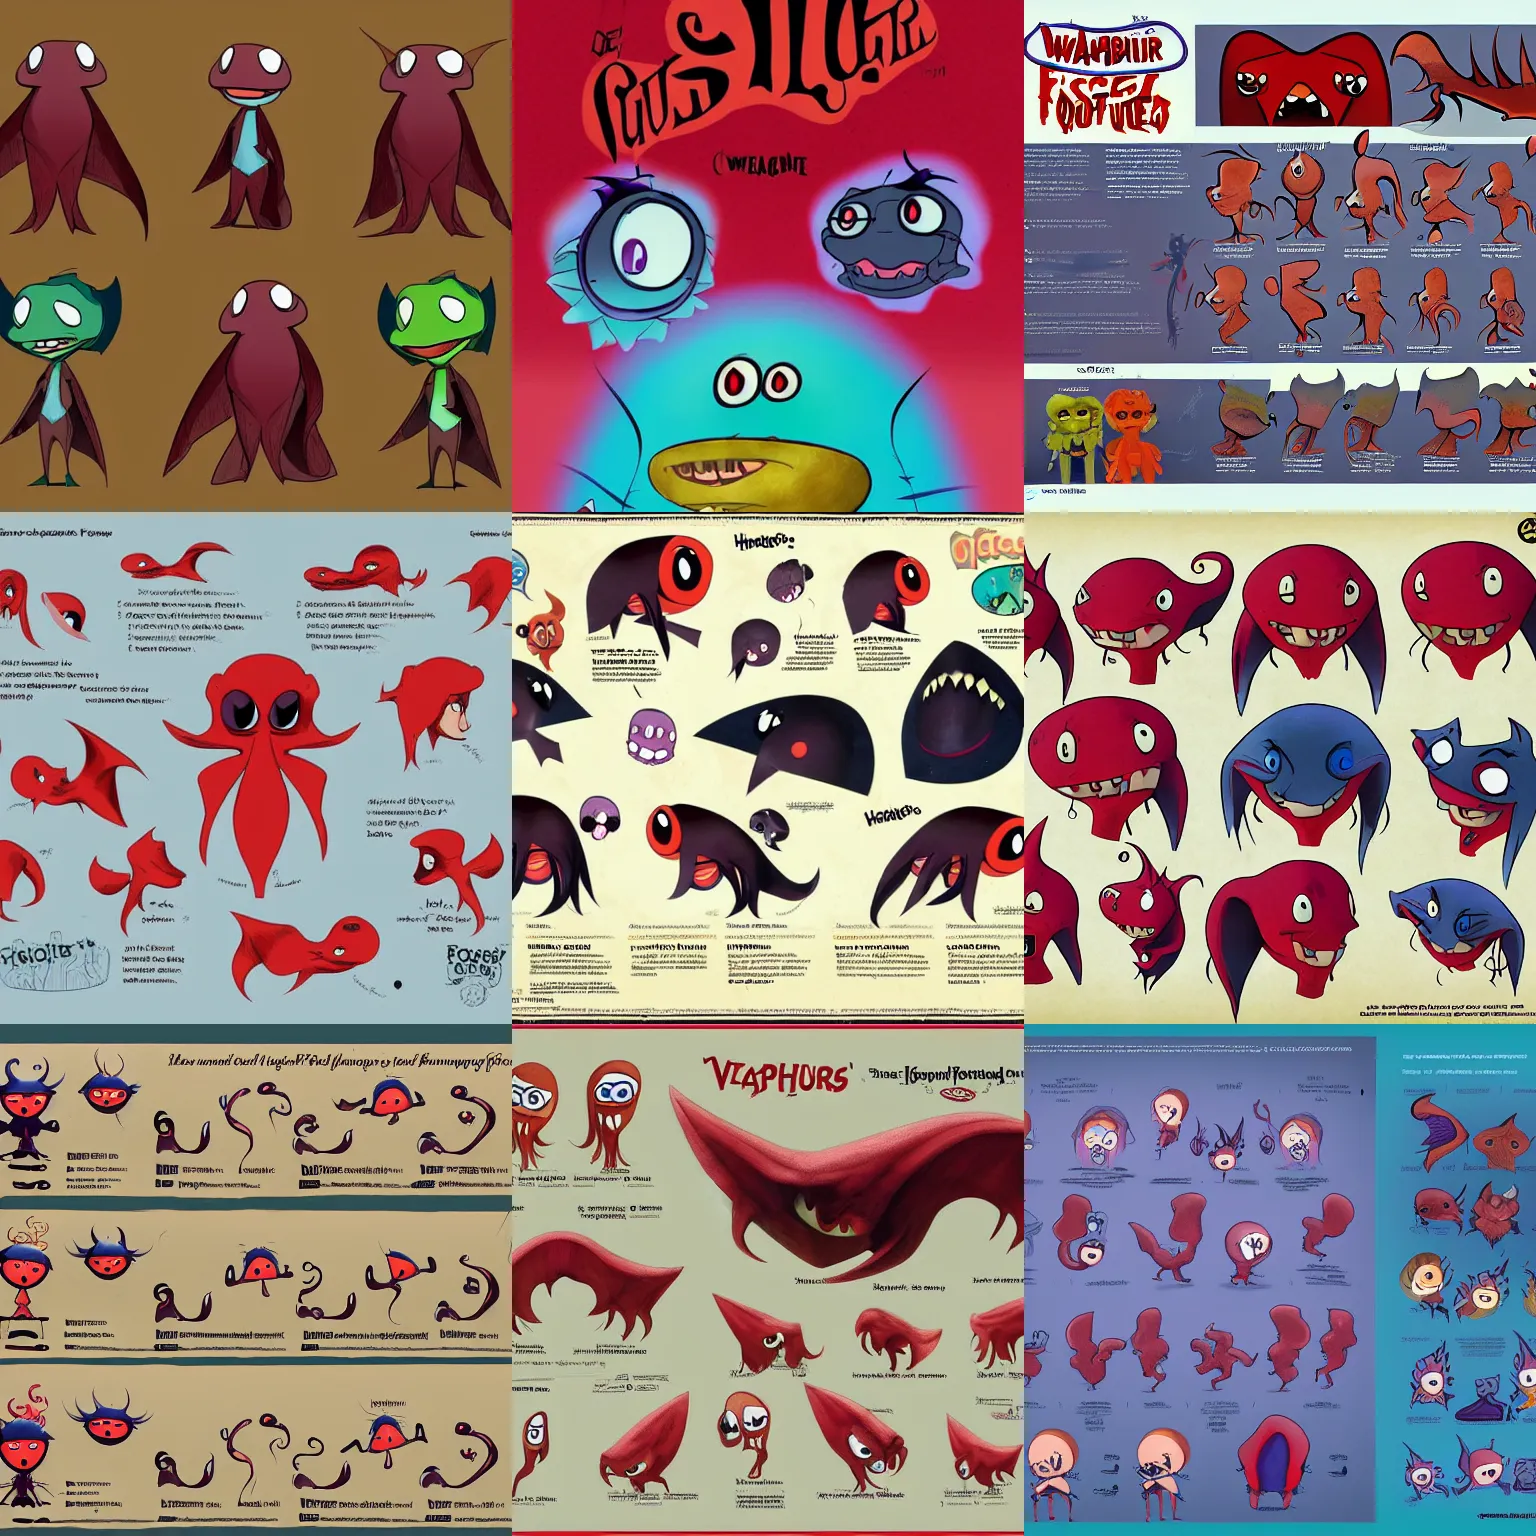 Prompt: A vampire squid imaginary friend character design sheet for the new fosters home for imaginary friends reboot cartoon on cartoon network by lauren faust and Jamie Hewlett